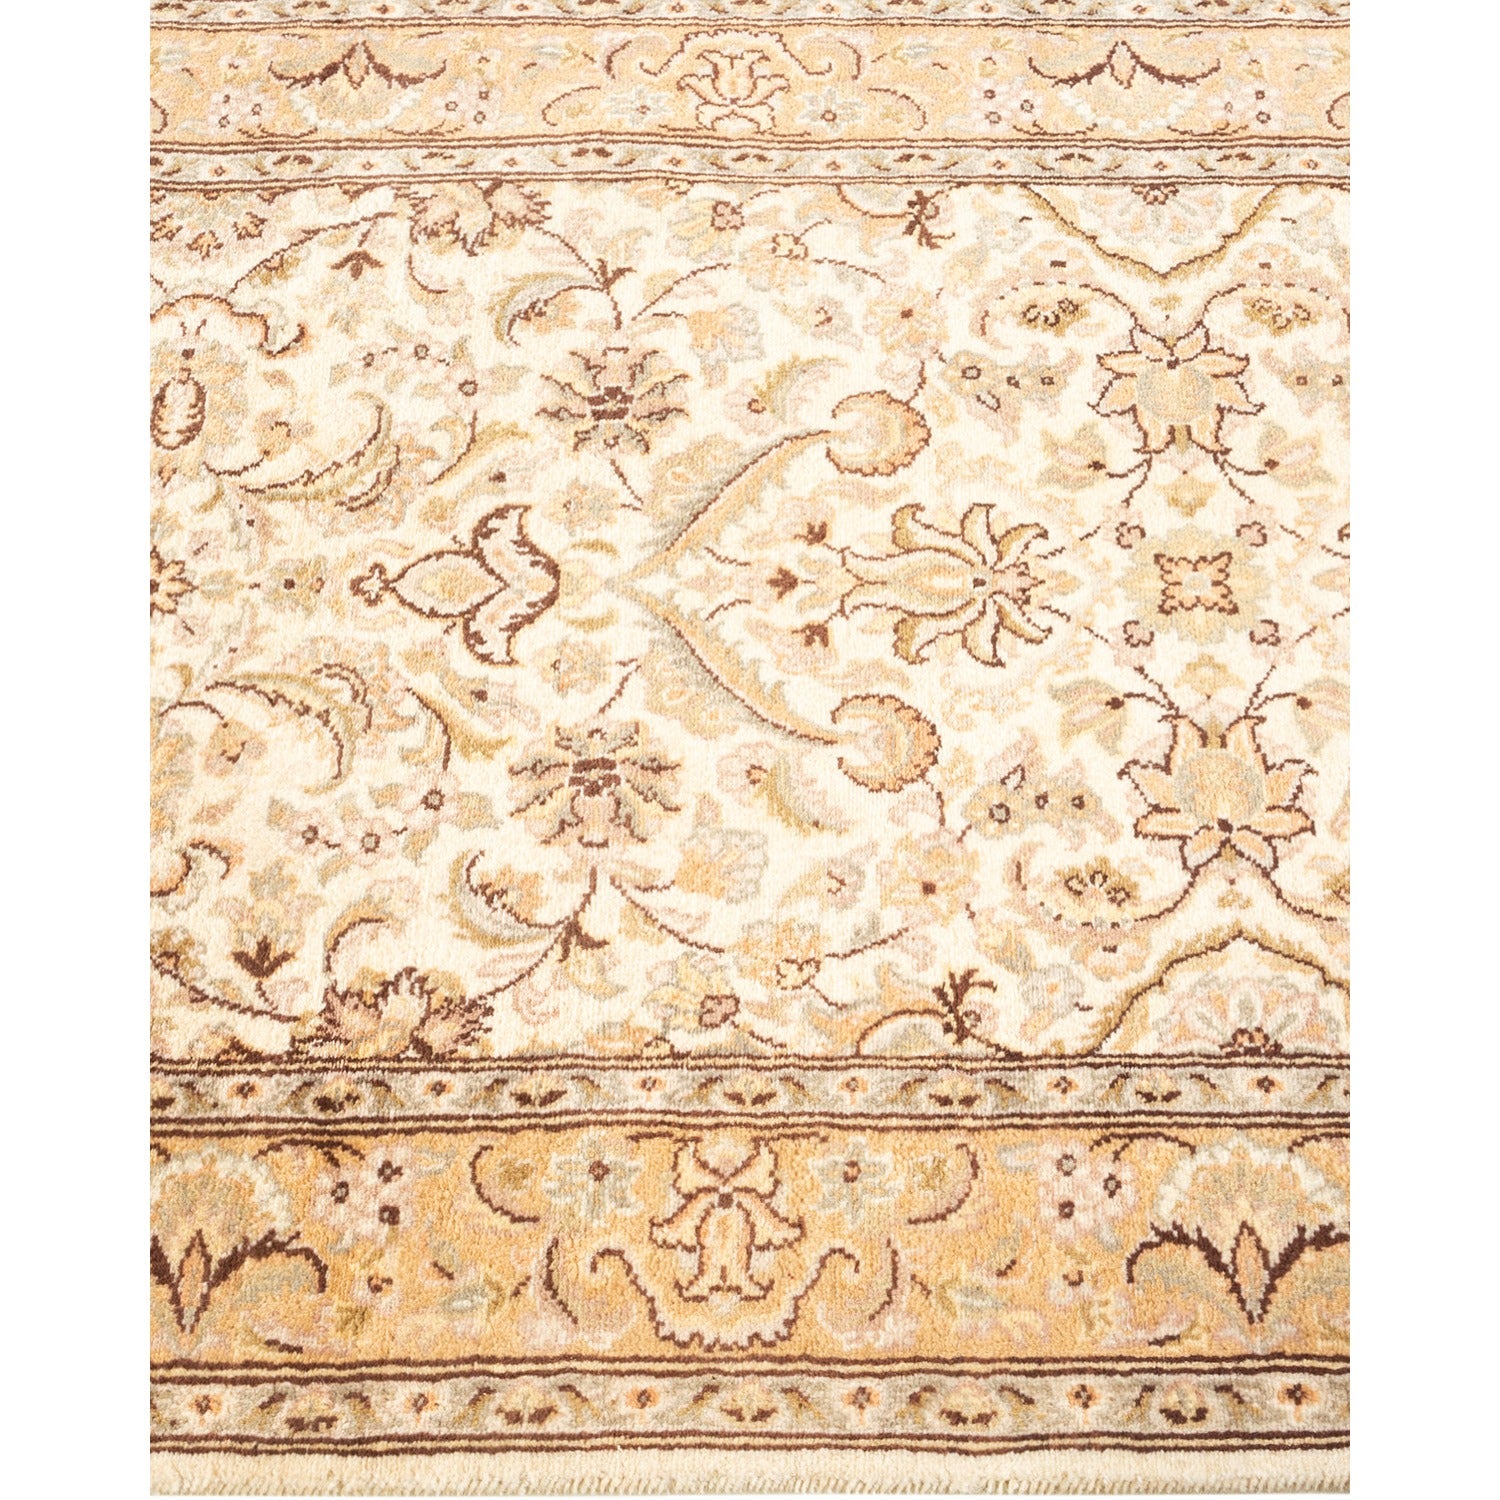 Ornate floral rug in tan, brown, and gold tones.